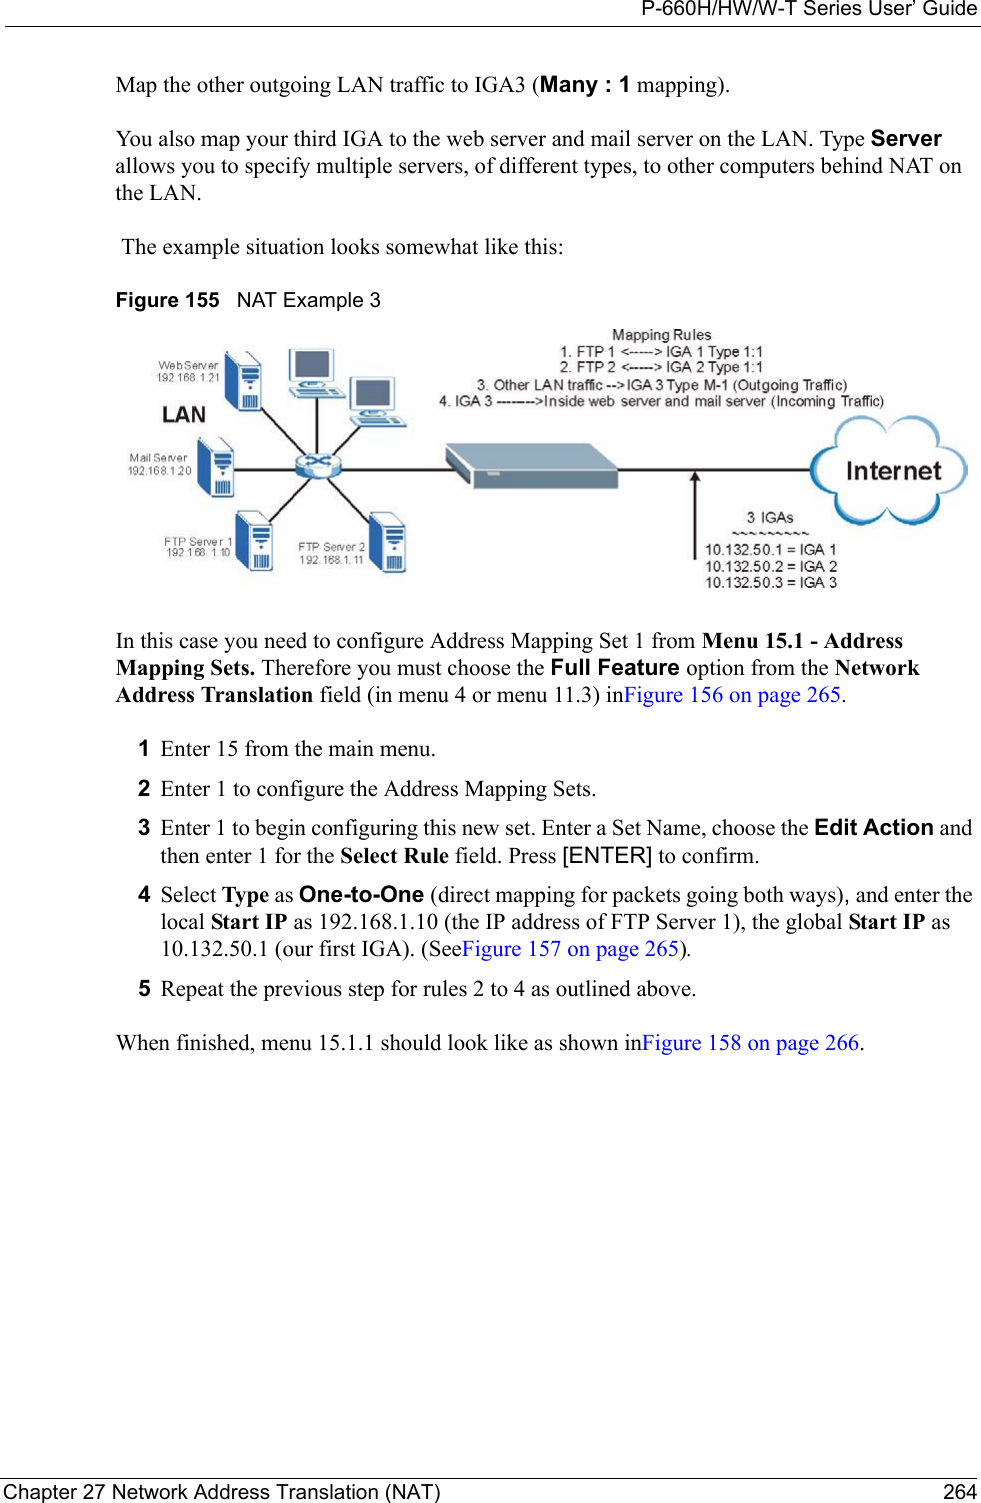 P-660H/HW/W-T Series User’ GuideChapter 27 Network Address Translation (NAT) 264Map the other outgoing LAN traffic to IGA3 (Many : 1 mapping).You also map your third IGA to the web server and mail server on the LAN. Type Server allows you to specify multiple servers, of different types, to other computers behind NAT on the LAN. The example situation looks somewhat like this:Figure 155   NAT Example 3In this case you need to configure Address Mapping Set 1 from Menu 15.1 - Address Mapping Sets. Therefore you must choose the Full Feature option from the Network Address Translation field (in menu 4 or menu 11.3) inFigure 156 on page 265. 1Enter 15 from the main menu.2Enter 1 to configure the Address Mapping Sets.3Enter 1 to begin configuring this new set. Enter a Set Name, choose the Edit Action and then enter 1 for the Select Rule field. Press [ENTER] to confirm.4Select Type as One-to-One (direct mapping for packets going both ways), and enter the local Start IP as 192.168.1.10 (the IP address of FTP Server 1), the global Start IP as 10.132.50.1 (our first IGA). (SeeFigure 157 on page 265).5Repeat the previous step for rules 2 to 4 as outlined above. When finished, menu 15.1.1 should look like as shown inFigure 158 on page 266.